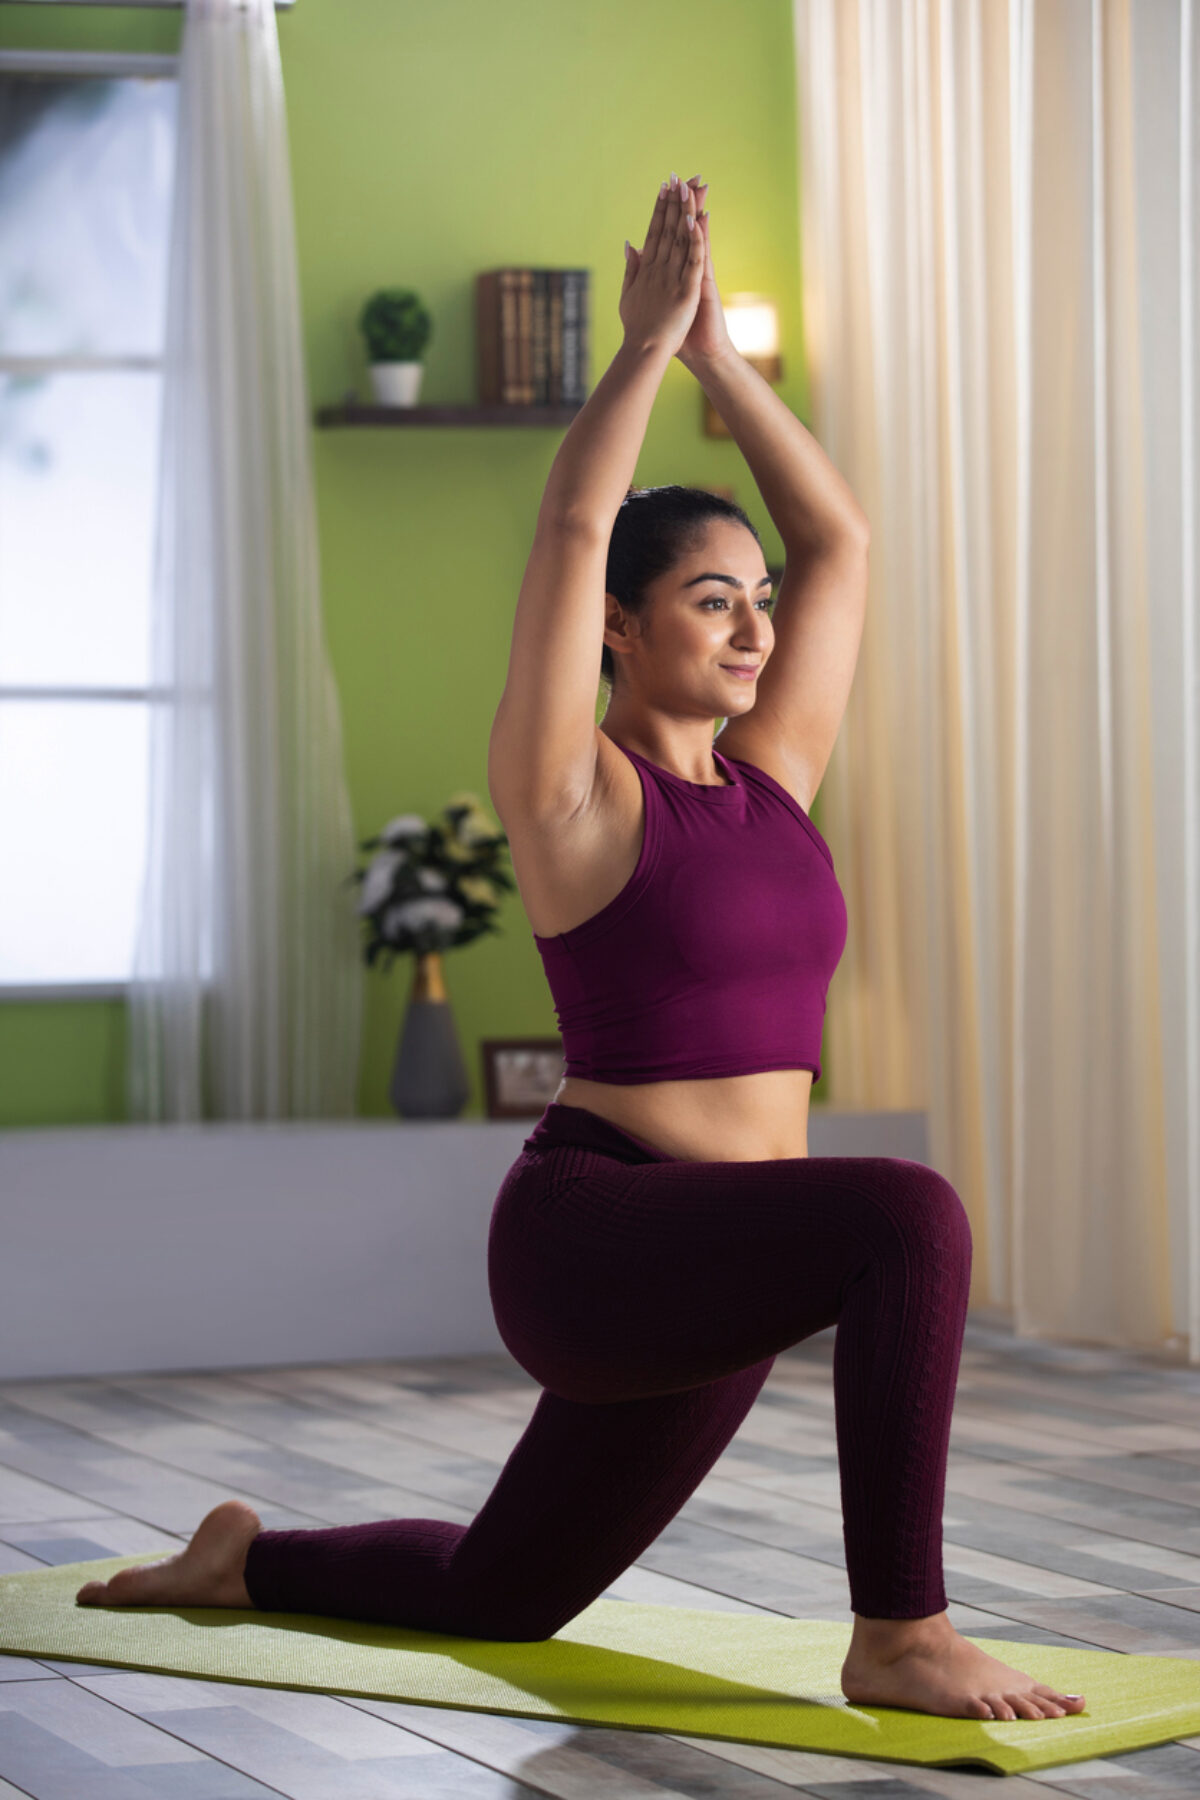 Yoga Can Help You Relieve Period Pain: Here Are 18 Best Asanas Recommended  For This | TheHealthSite.com